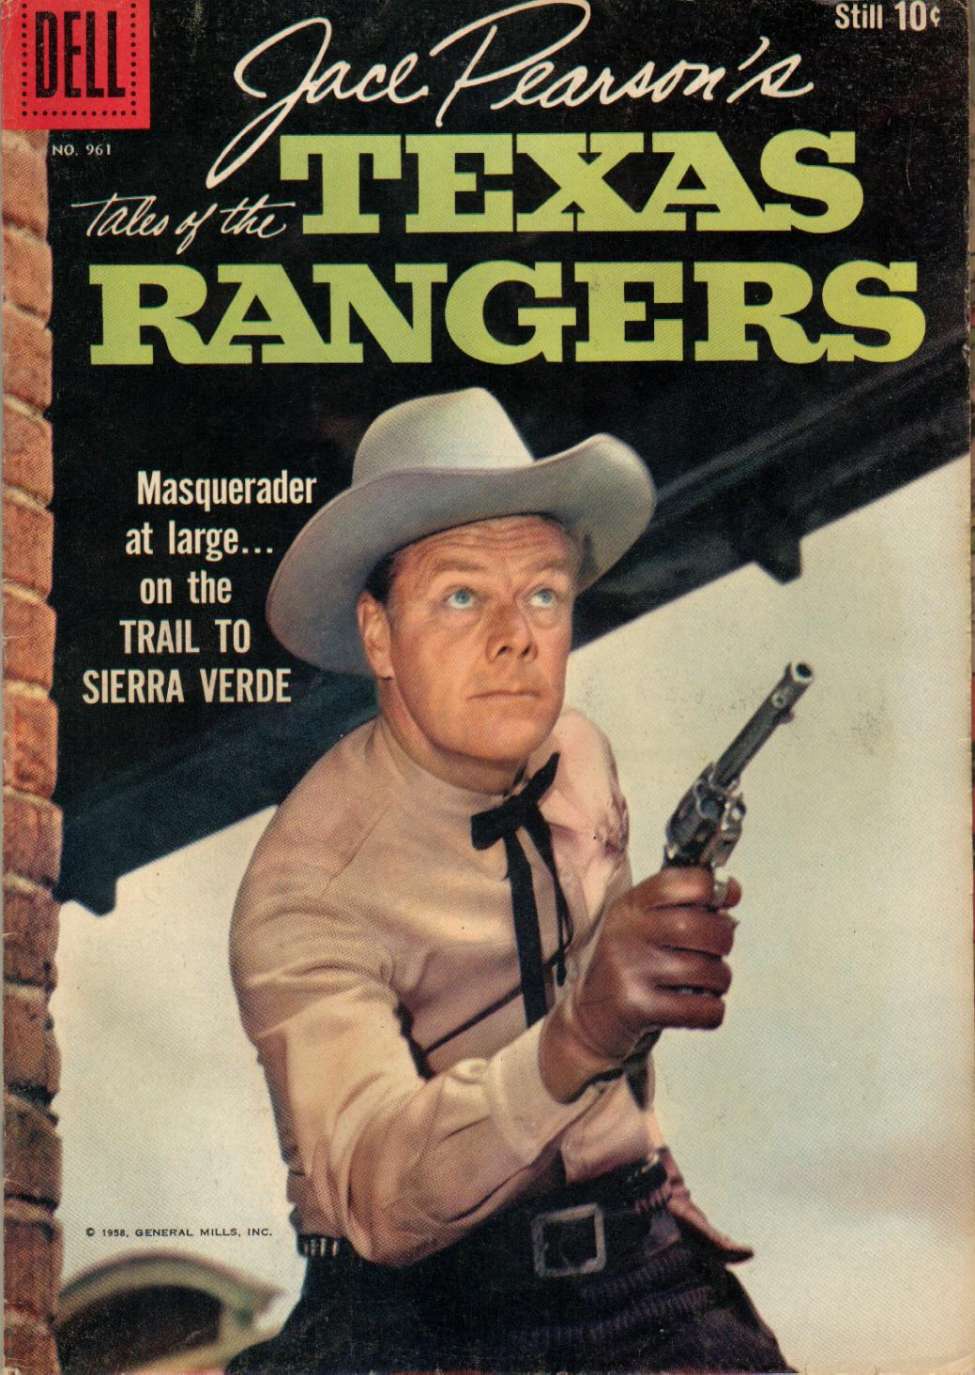 Book Cover For 0961 - Jake Pearson's Tales of the Texas Rangers